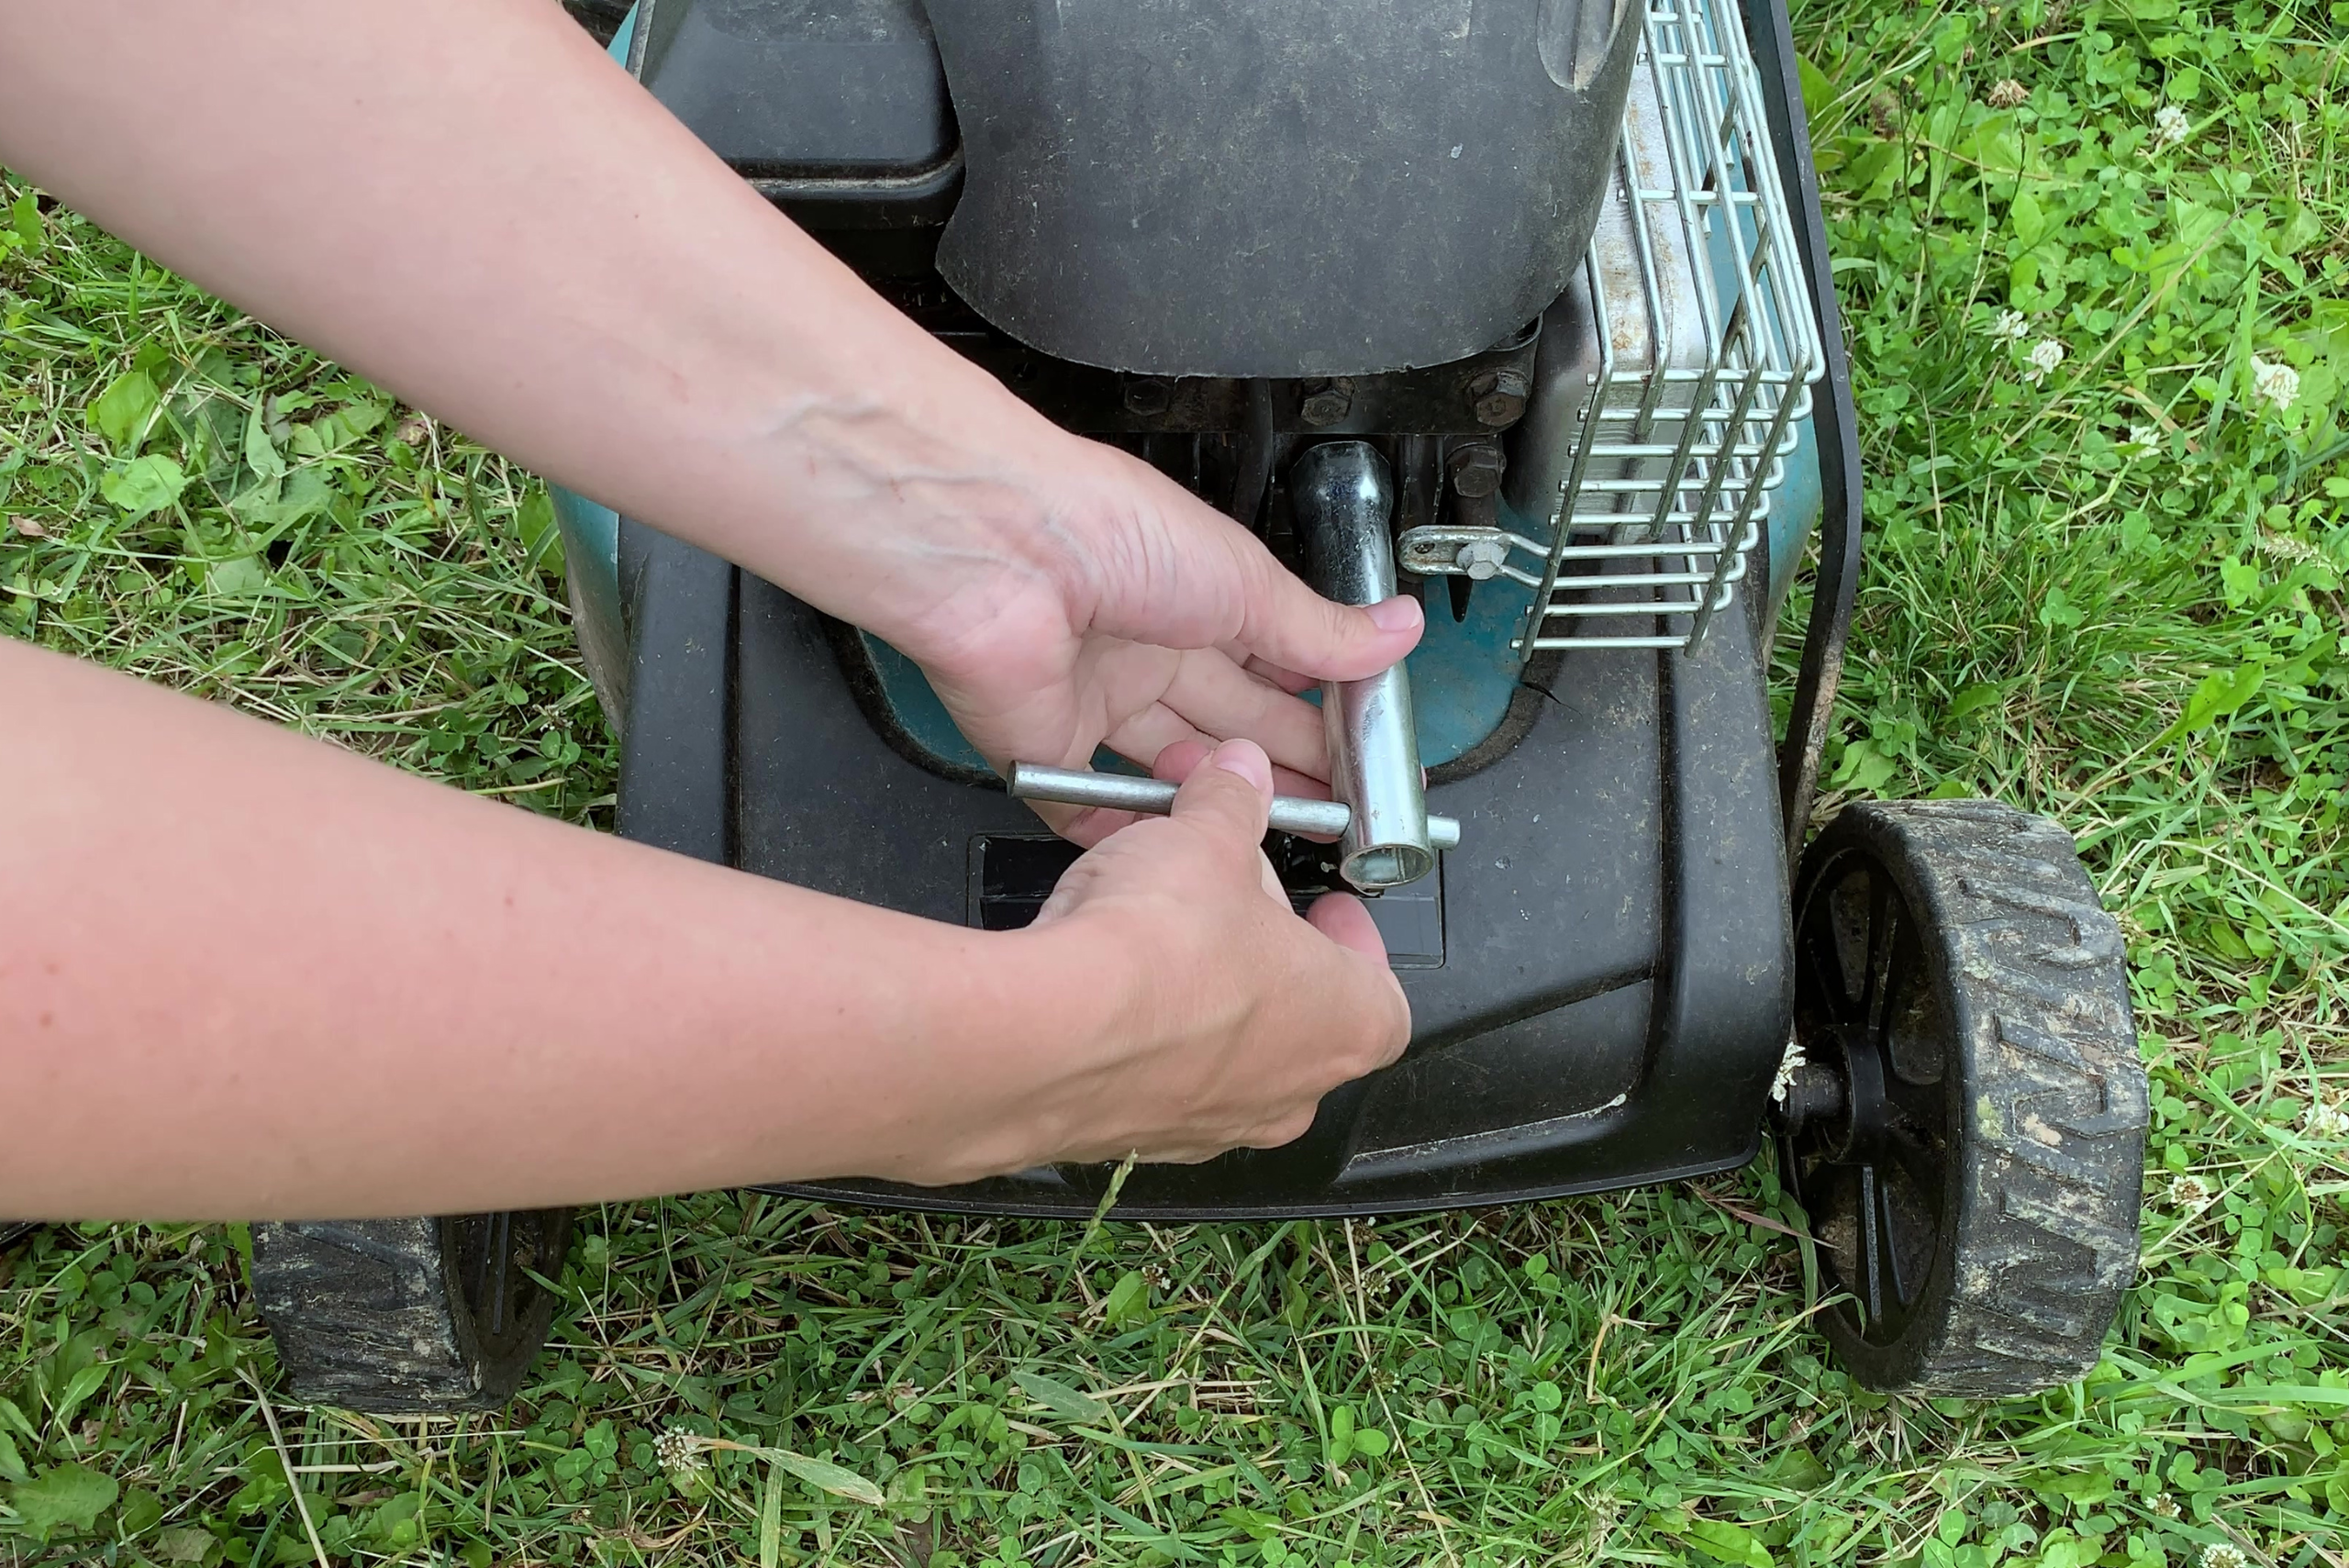 How to change the oil, spark plugs, and fuel filter of a lawn mower